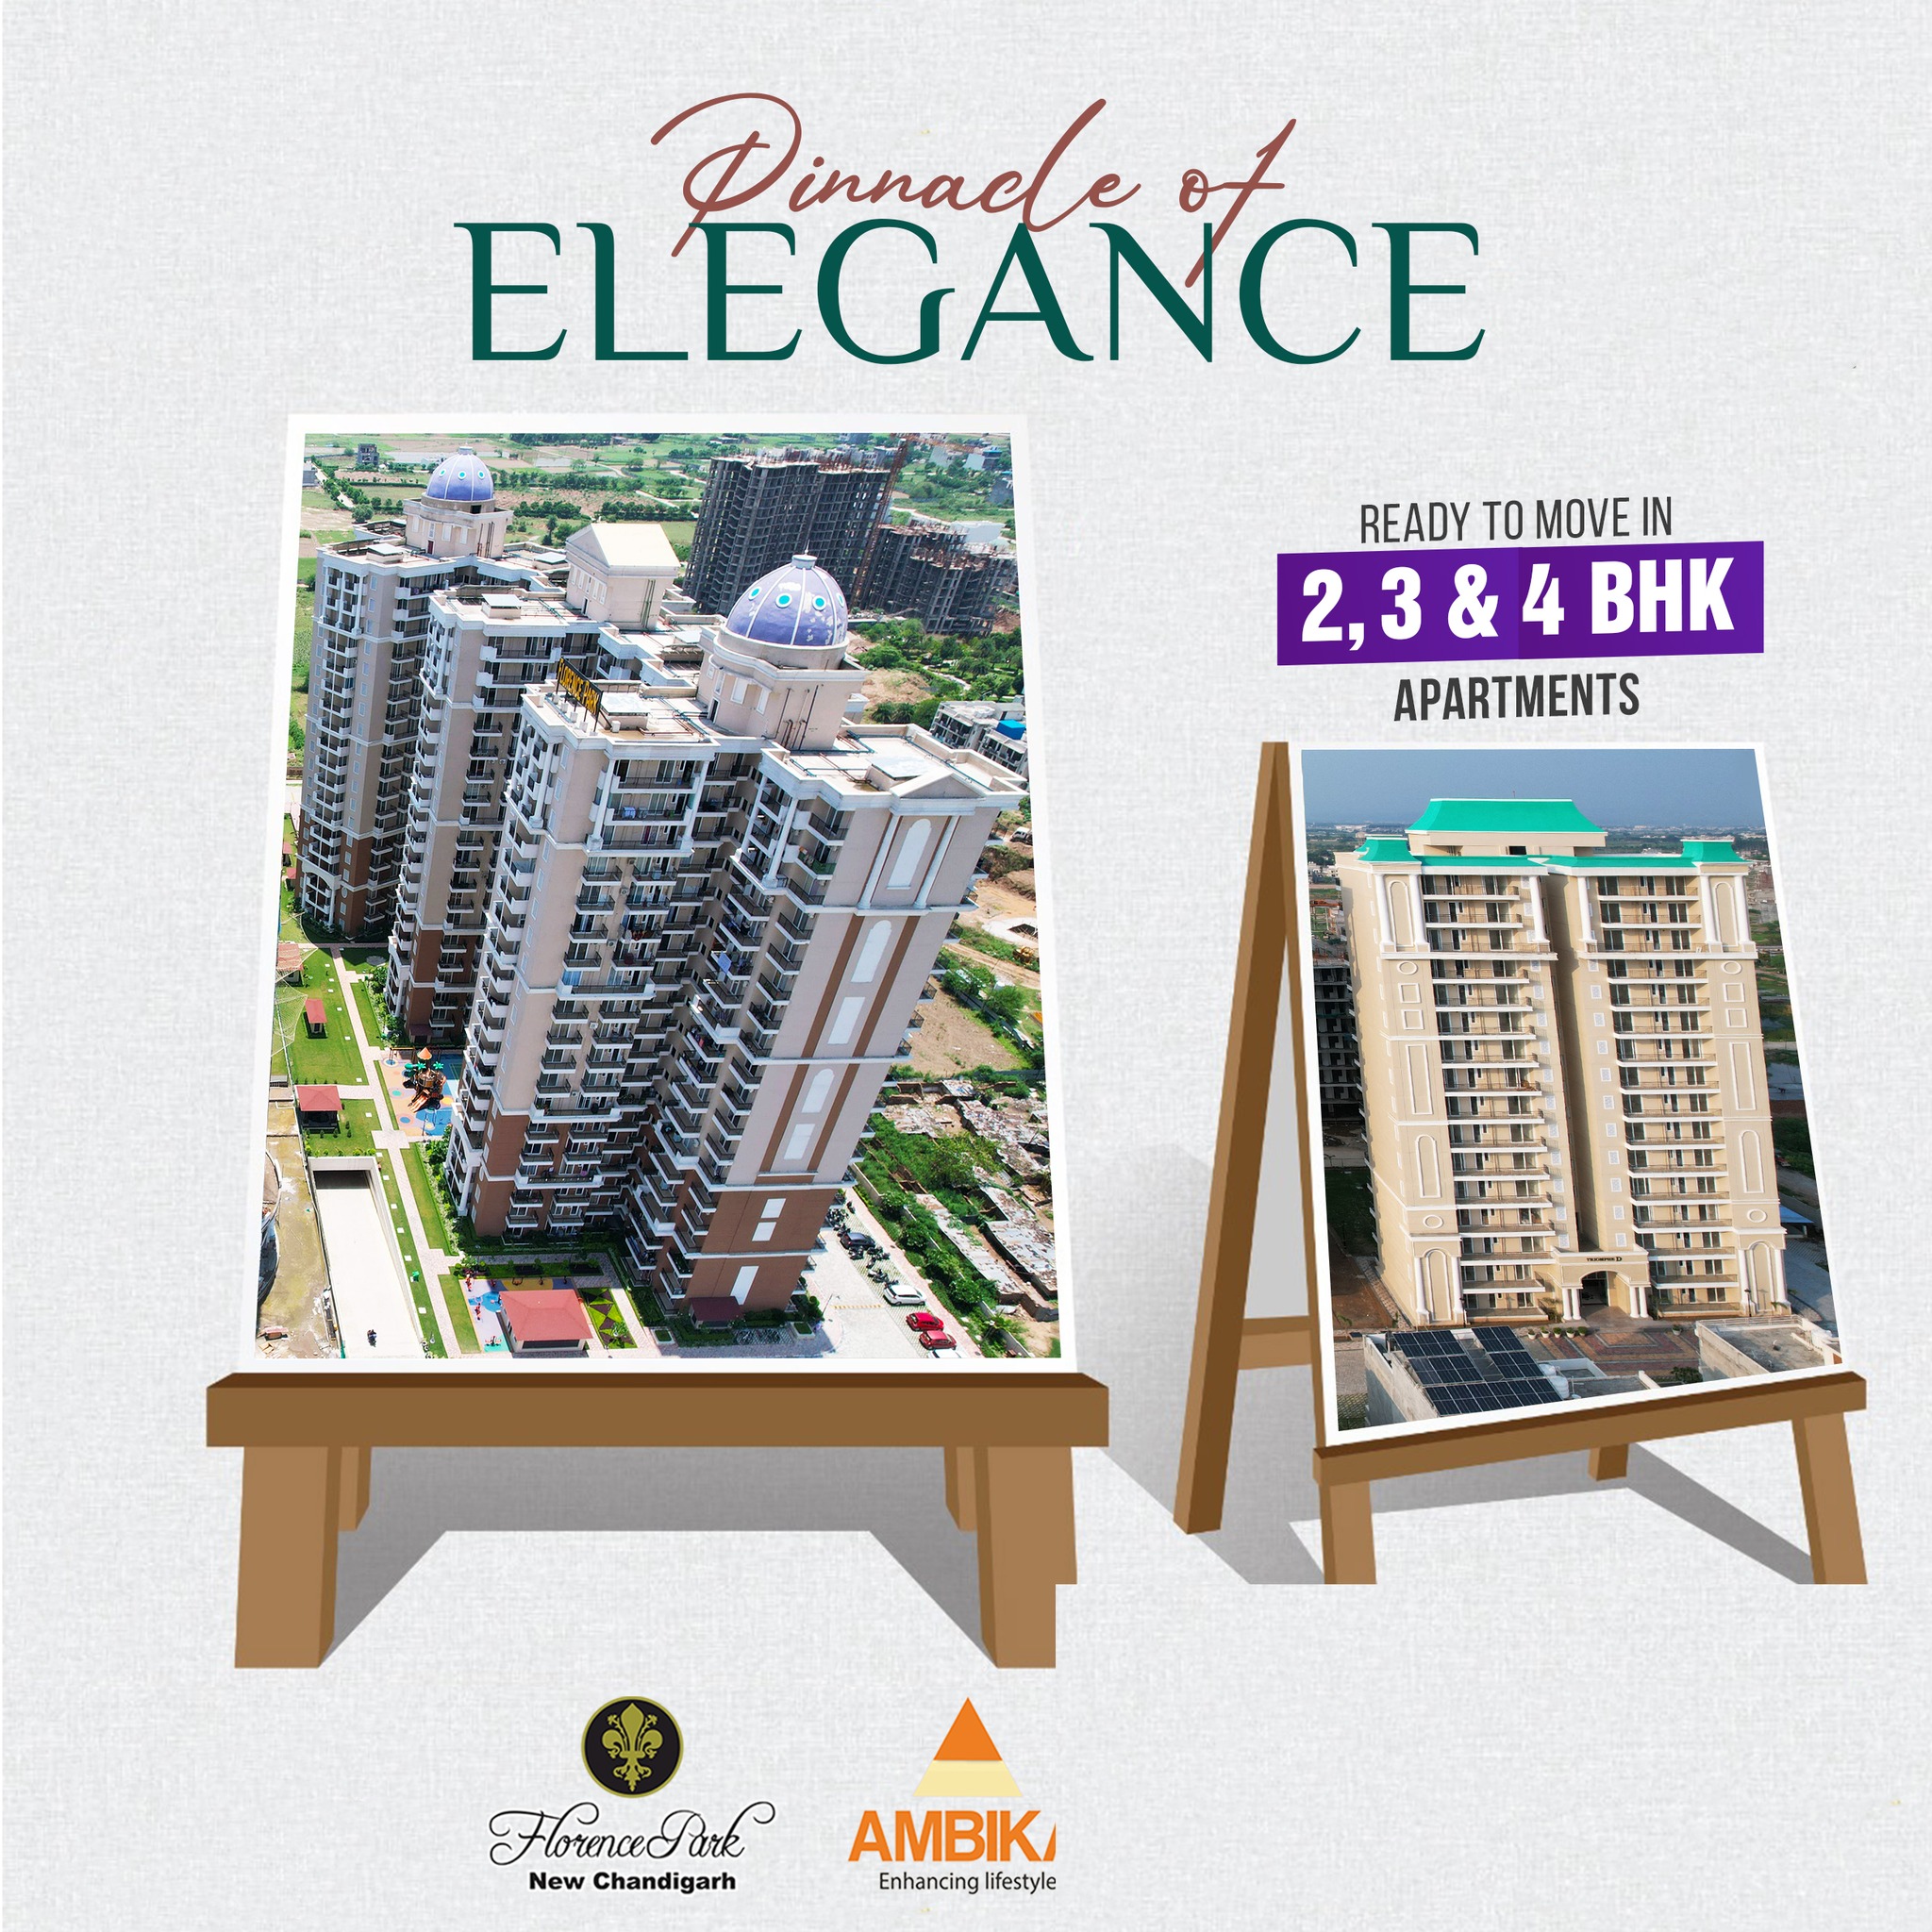 Pinnacle of Elegance Book your dream home at Ambika Florence Park, Chandigarh Update